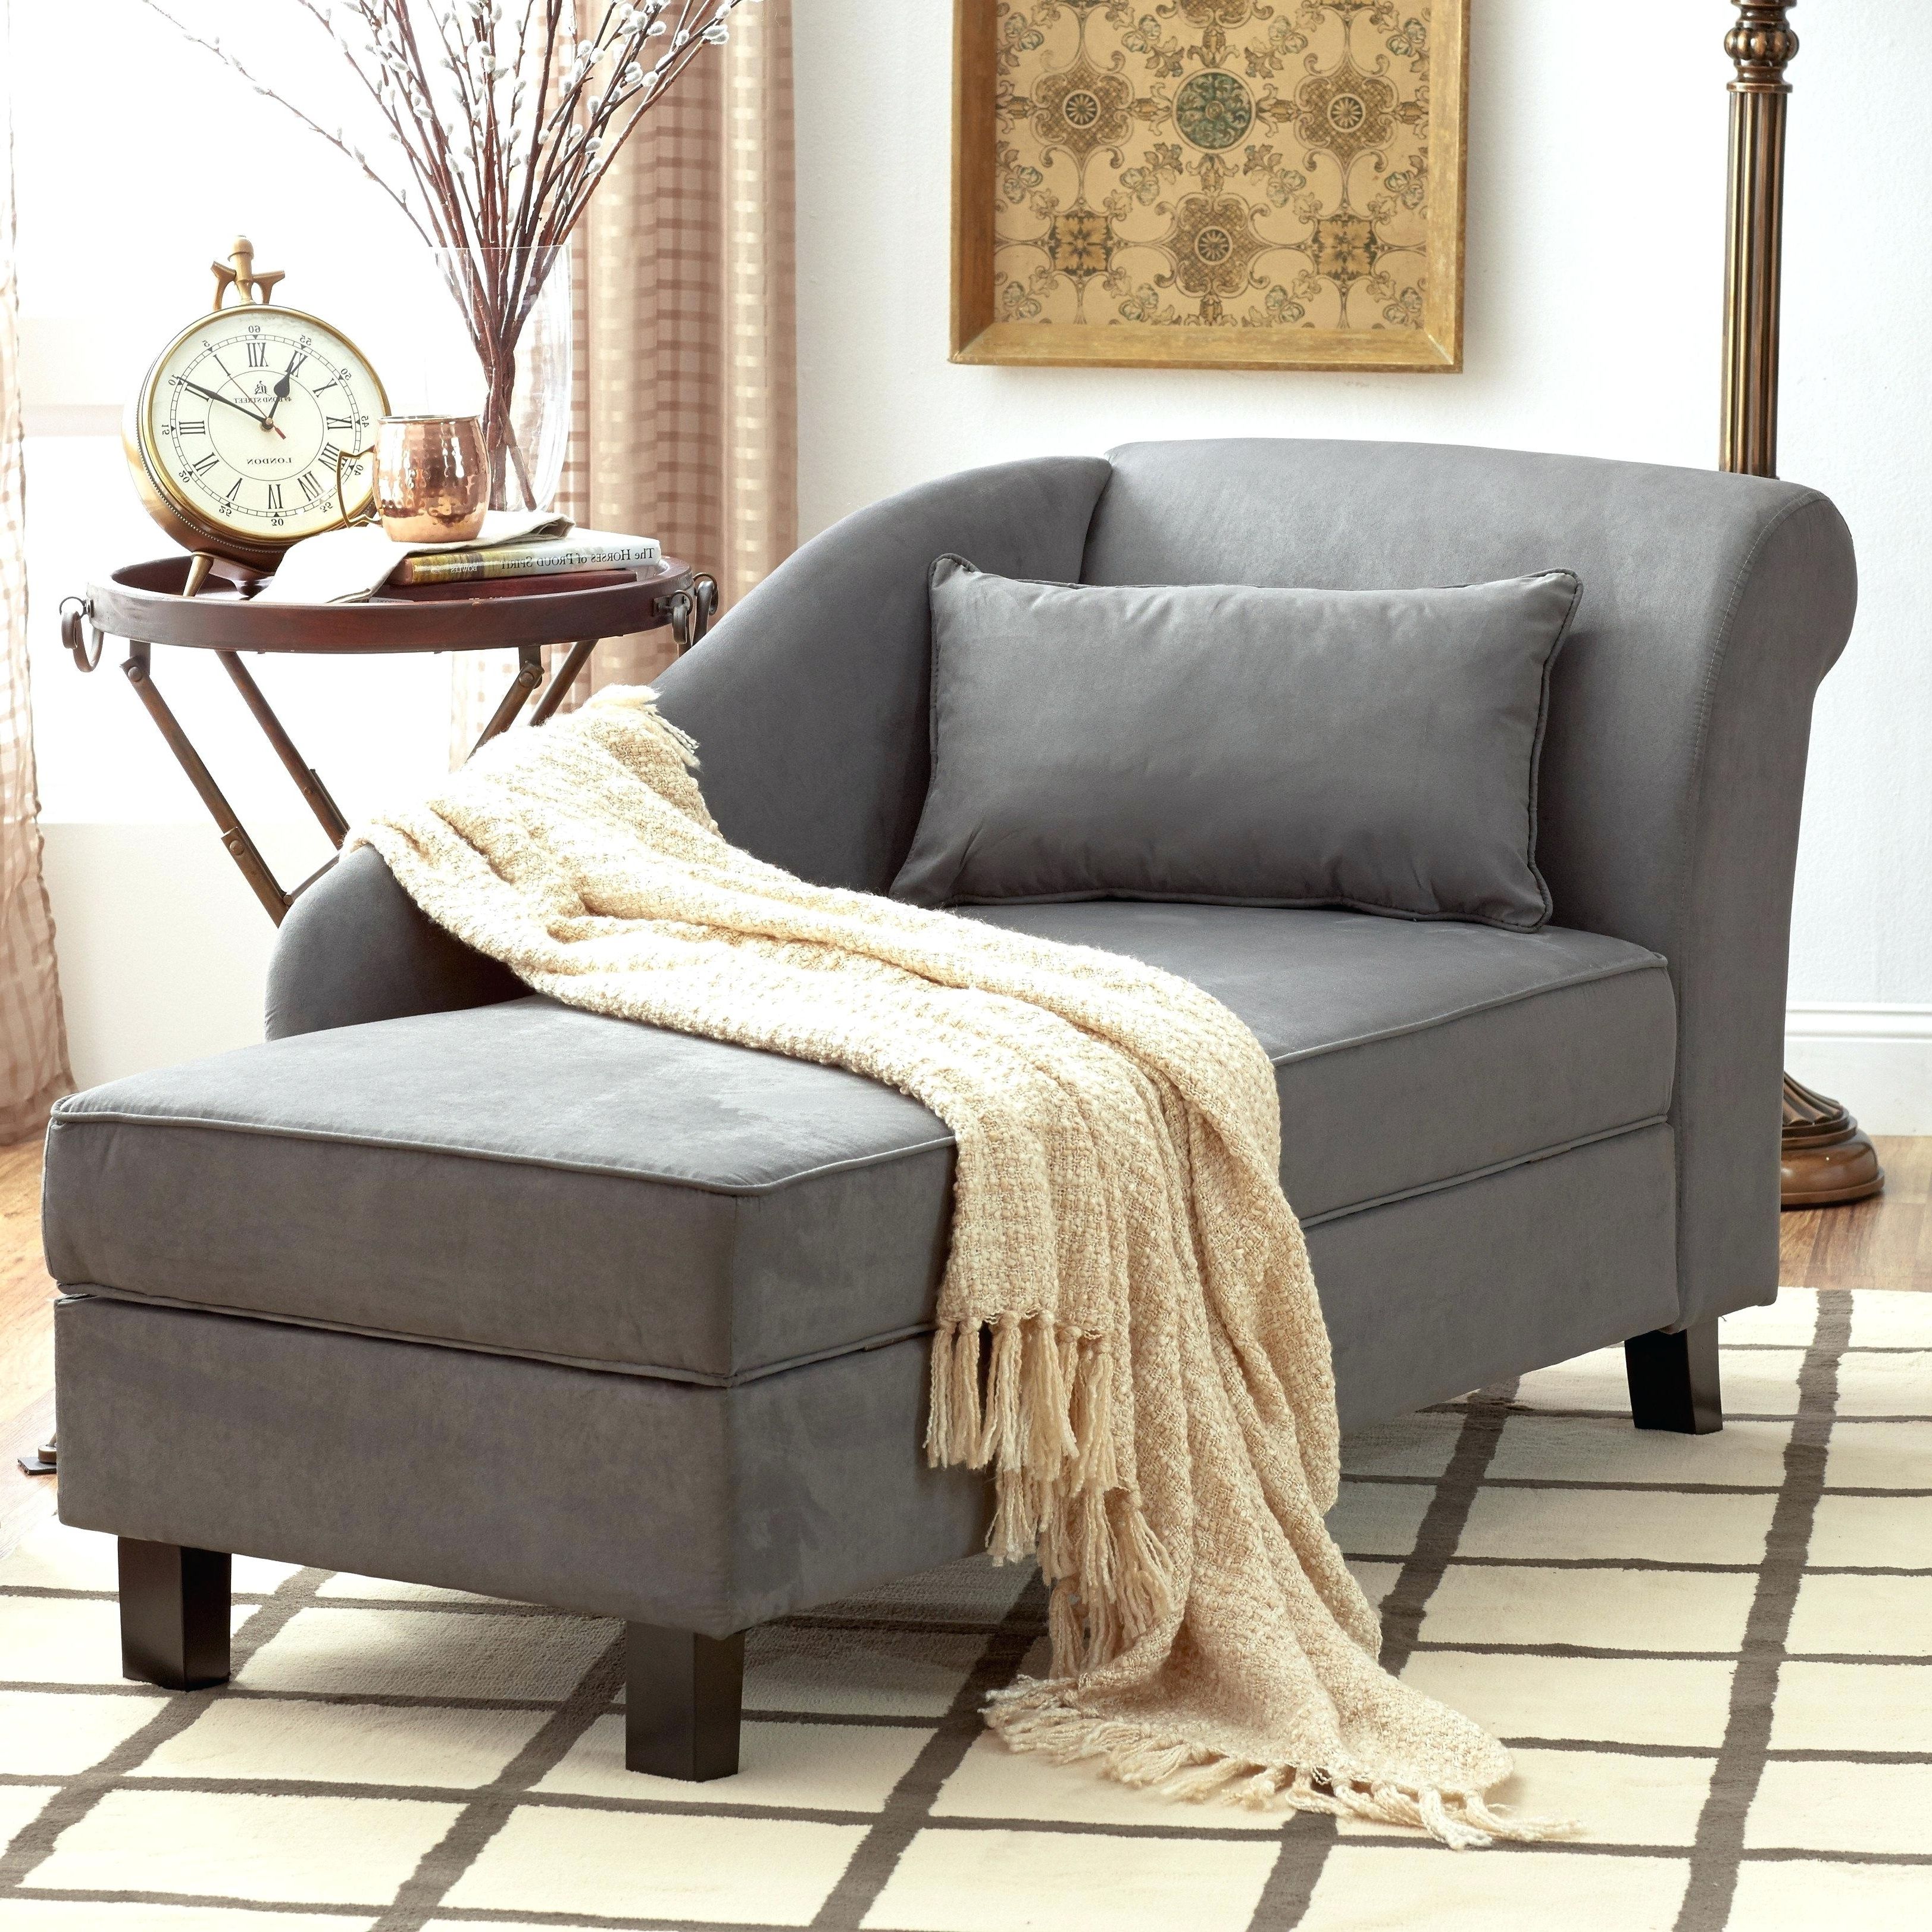 15 Ideas of Indoor Chaise Lounge Slipcovers